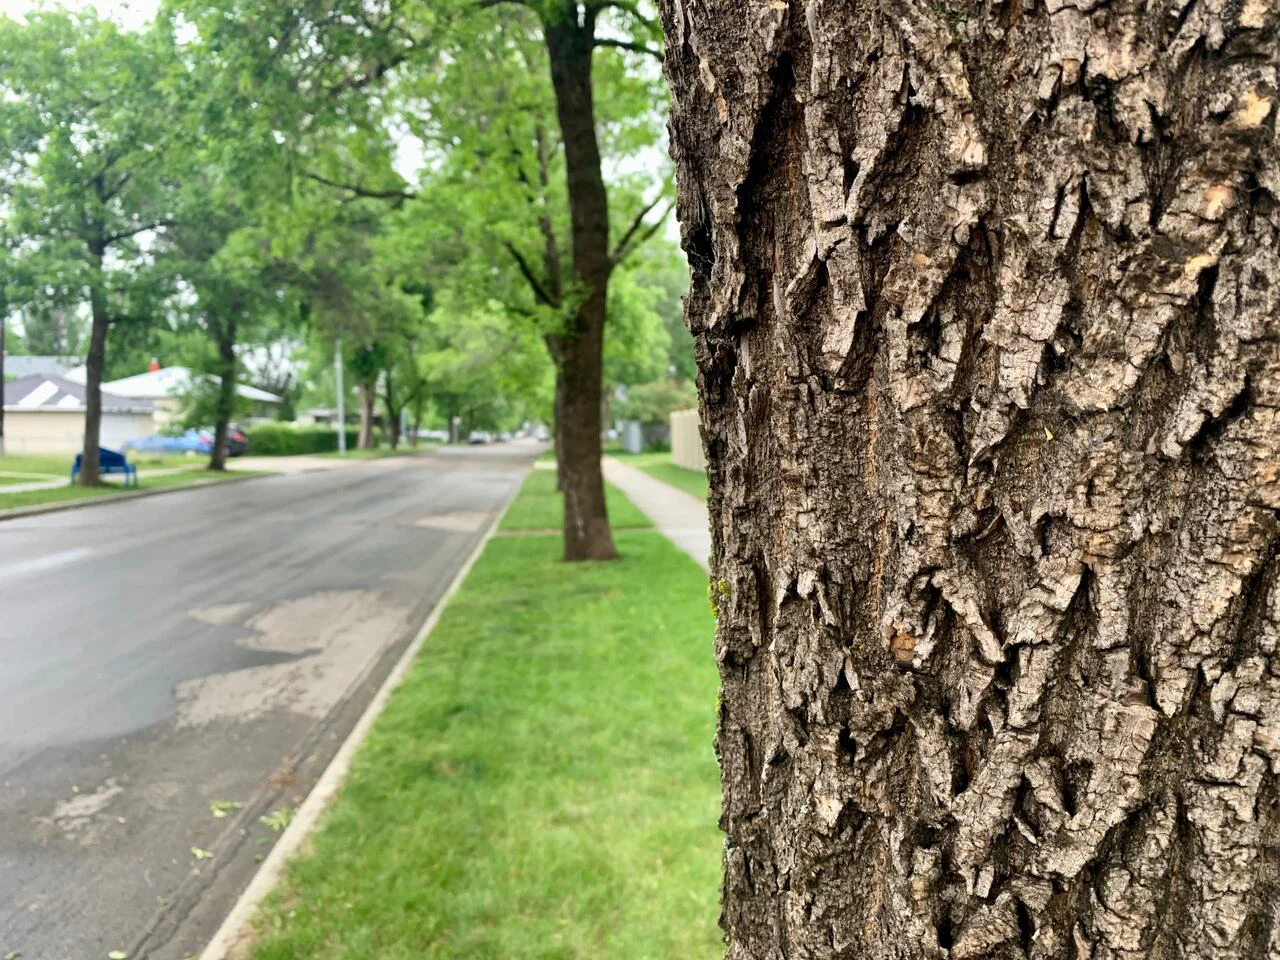 Edmonton's tree bylaw requires a permit to work within five metres of a tree located on public property. (Adrienne Lamb/CBC)